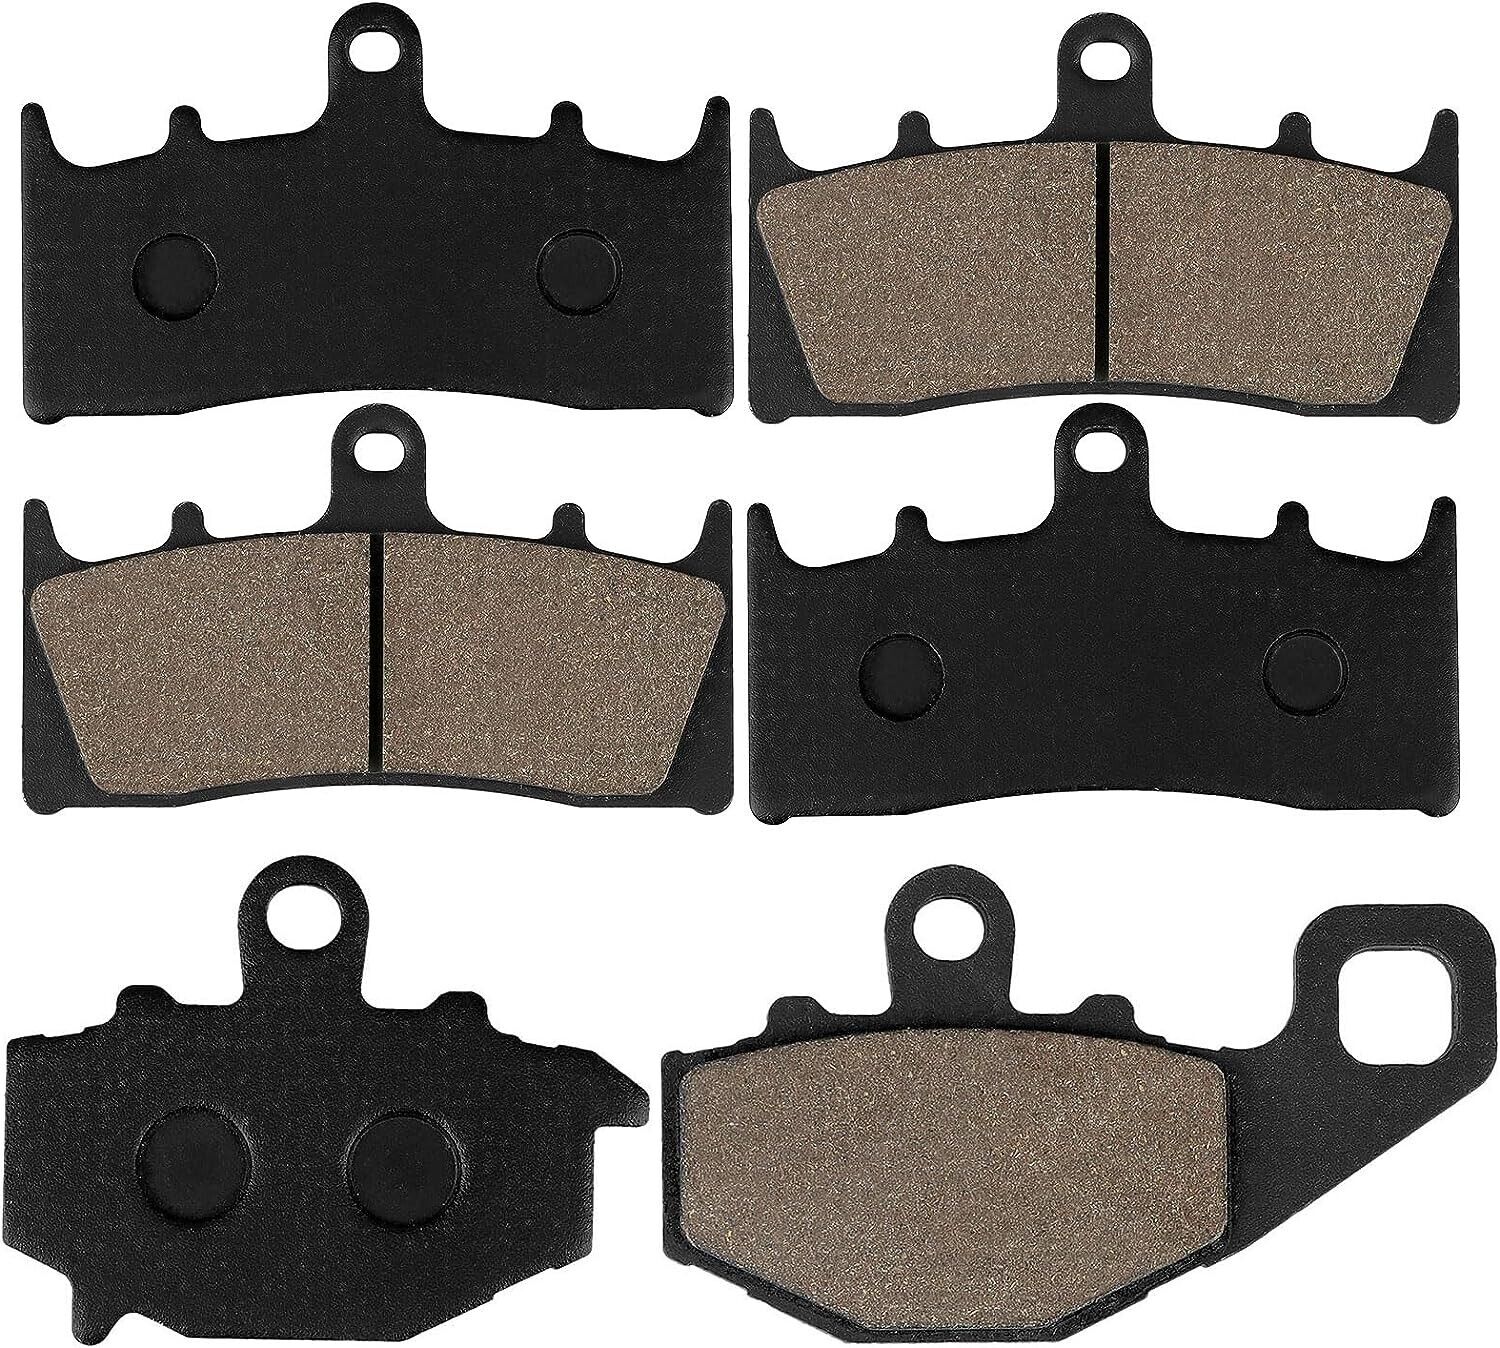 Front and Rear Brake Pads for Kawasaki ZX6R ZX-6R ZX600 1998-2001, ZZR600 ZX 600